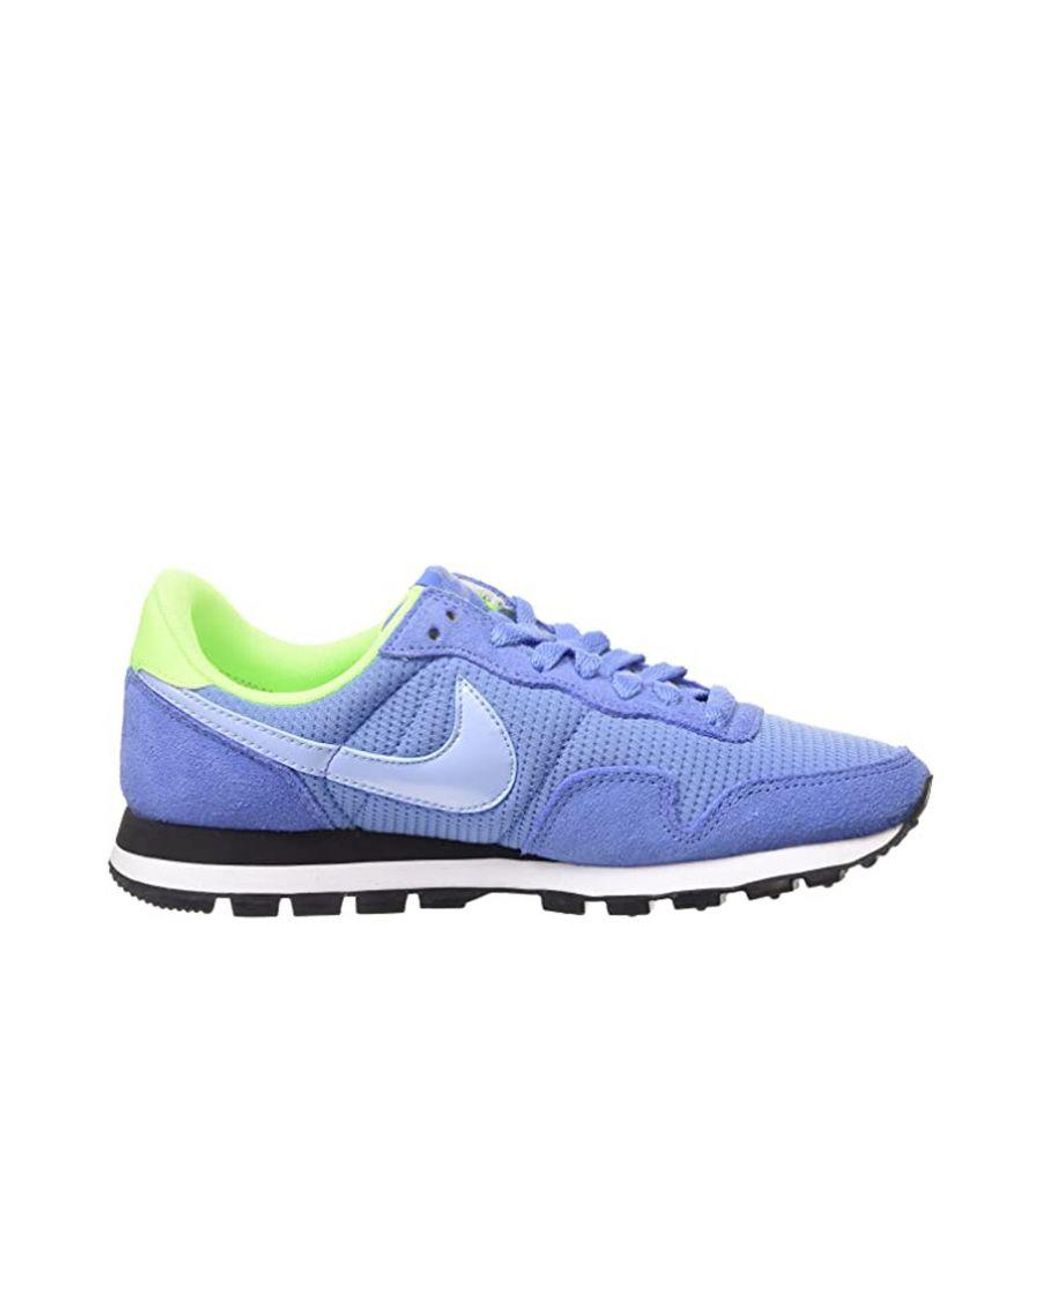 Nike Air Pegasus 83 Lace Up Blue Synthetic Trainers 407477 400 | Lyst UK